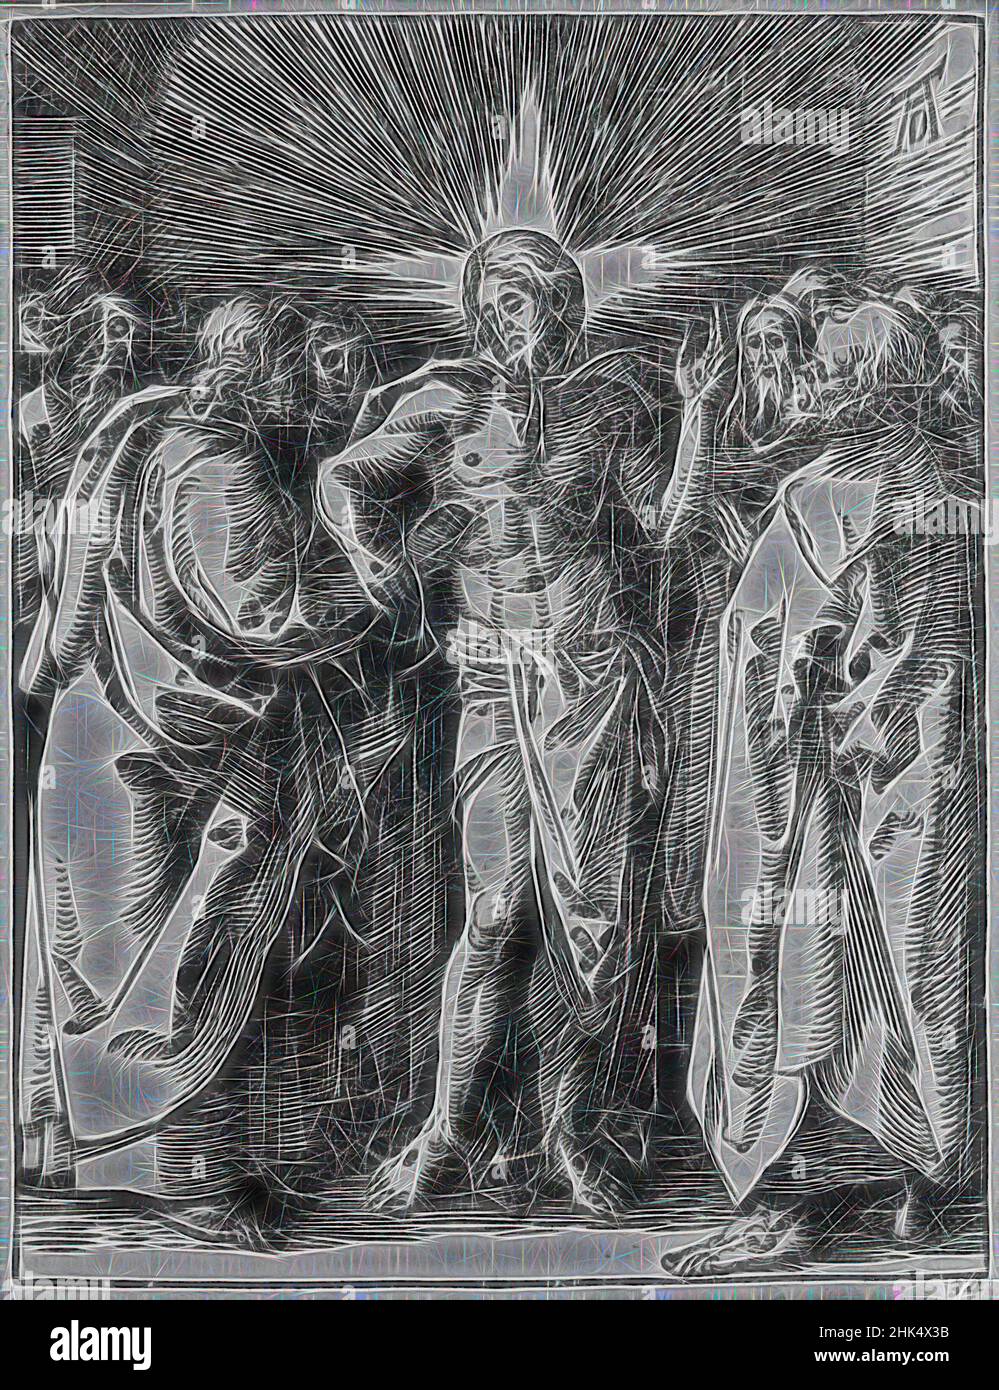 Inspired by Doubting Thomas, The Small Passion, Albrecht Dürer, German, 1471-1528, Woodcut on laid paper, Germany, 1509-1511; edition of 1511, Image: 5 x 3 3/4 in., 12.7 x 9.5 cm, Christ, Doubting Thomas, Durer, Small Passion, woodcut, Reimagined by Artotop. Classic art reinvented with a modern twist. Design of warm cheerful glowing of brightness and light ray radiance. Photography inspired by surrealism and futurism, embracing dynamic energy of modern technology, movement, speed and revolutionize culture Stock Photo